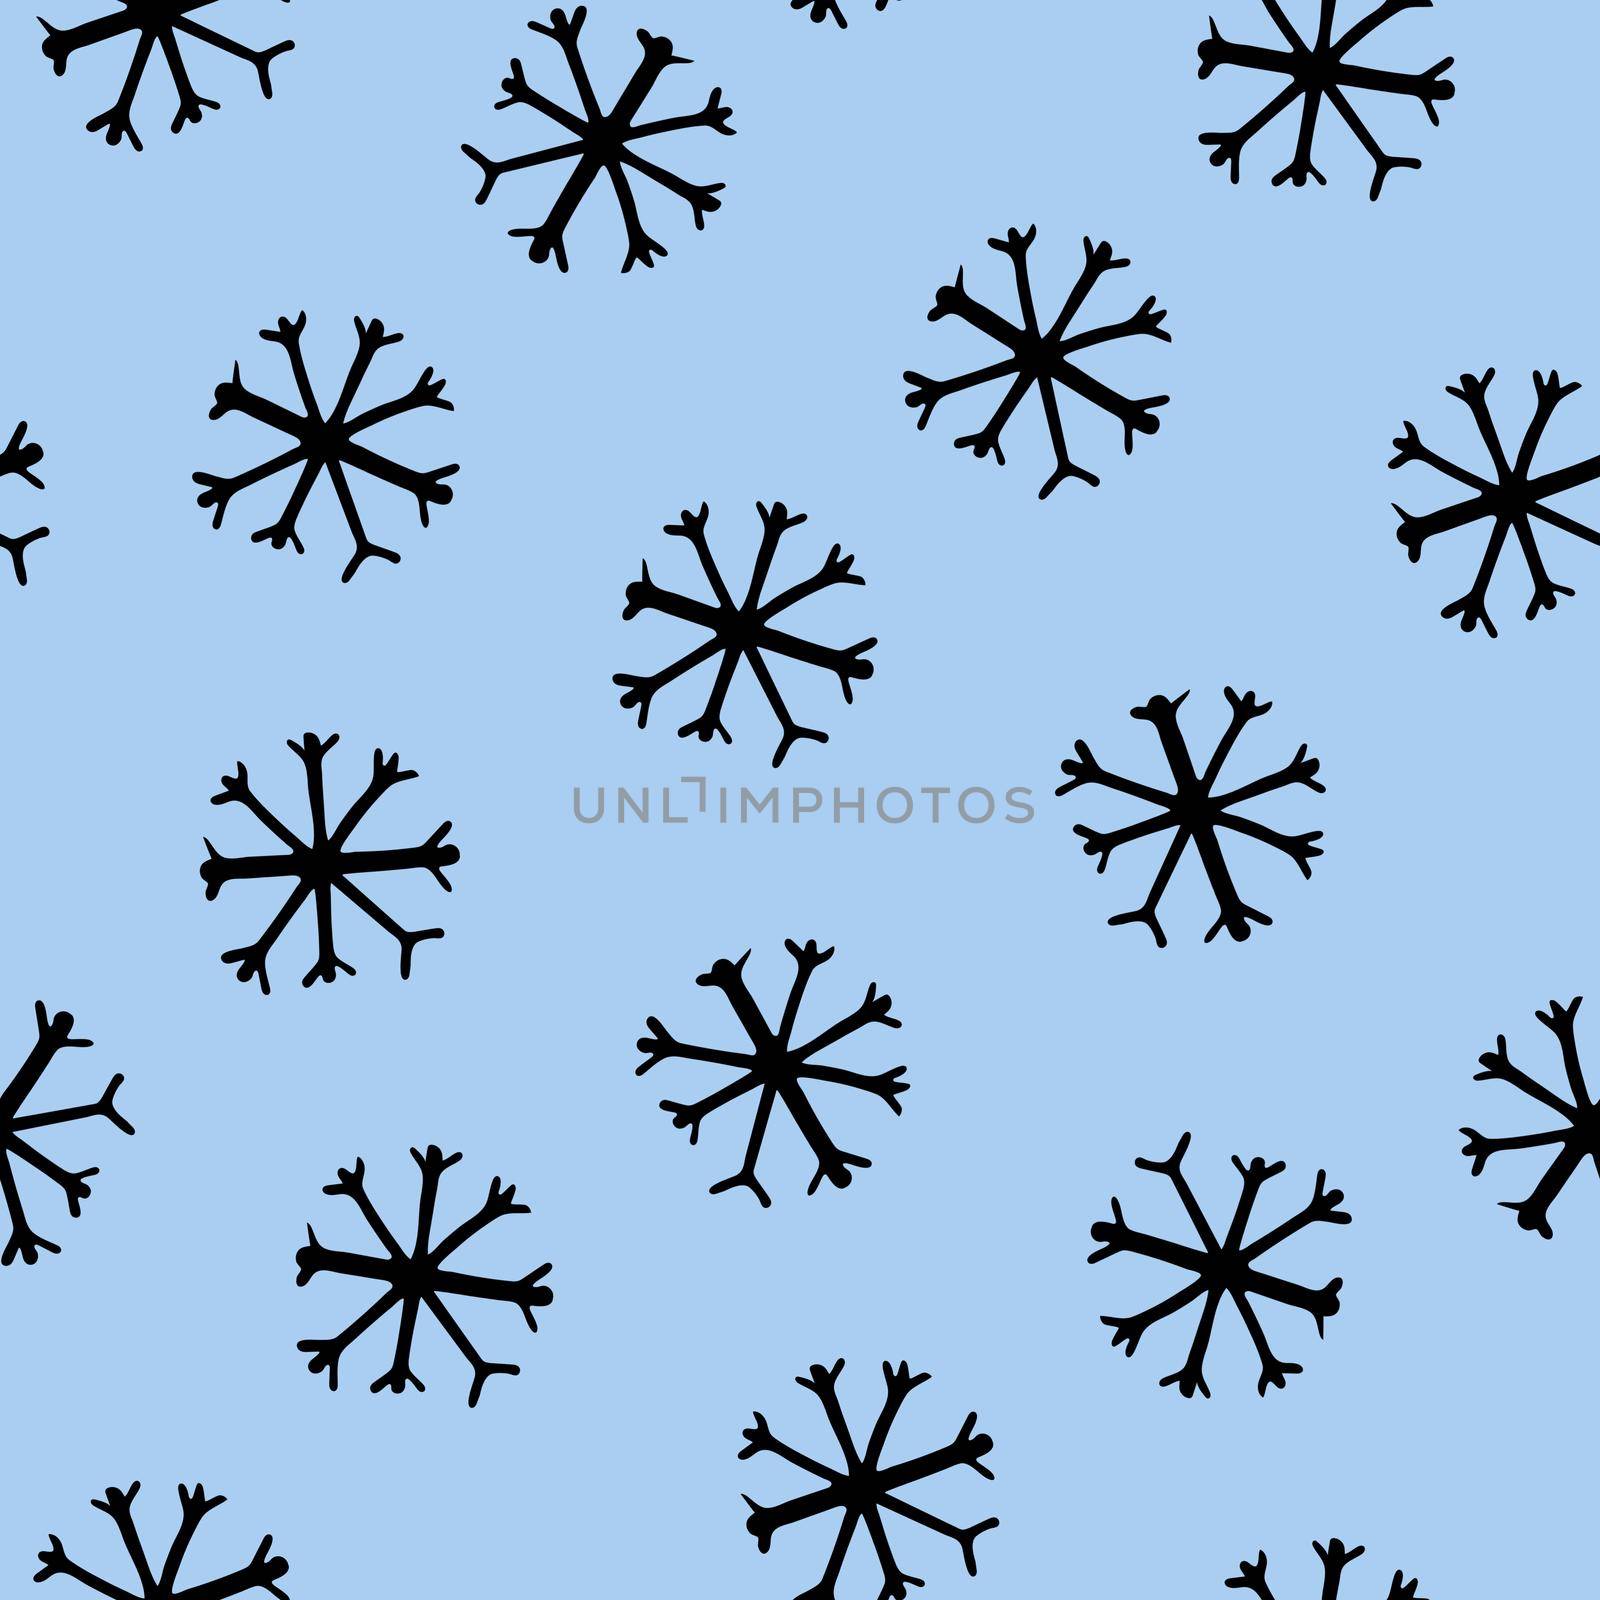 Seamless Pattern with Black Snowflakes on Light Blue Background. Abstract Hand-Drawn Doodle Snowflakes.